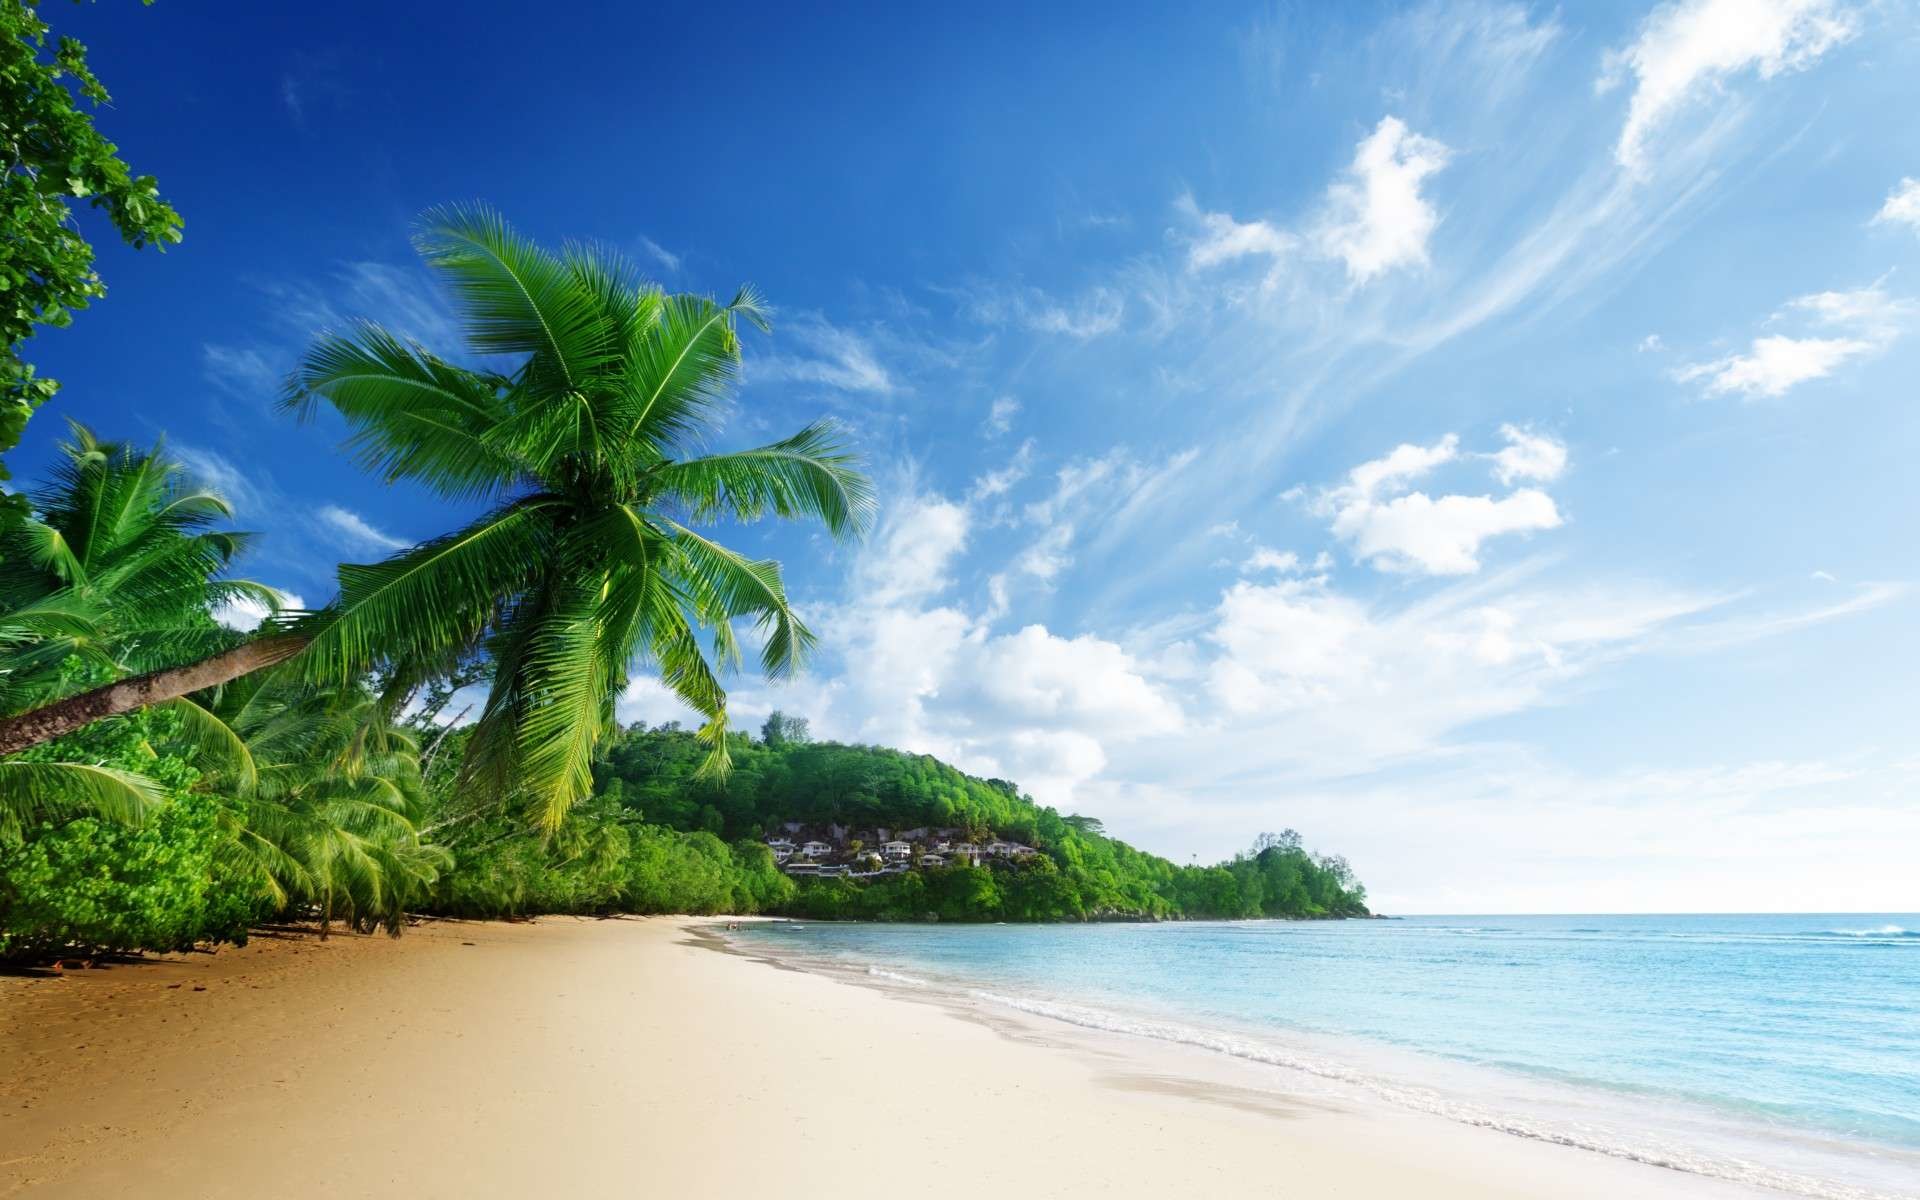 Beach Scenery Wallpaper (59+ images)